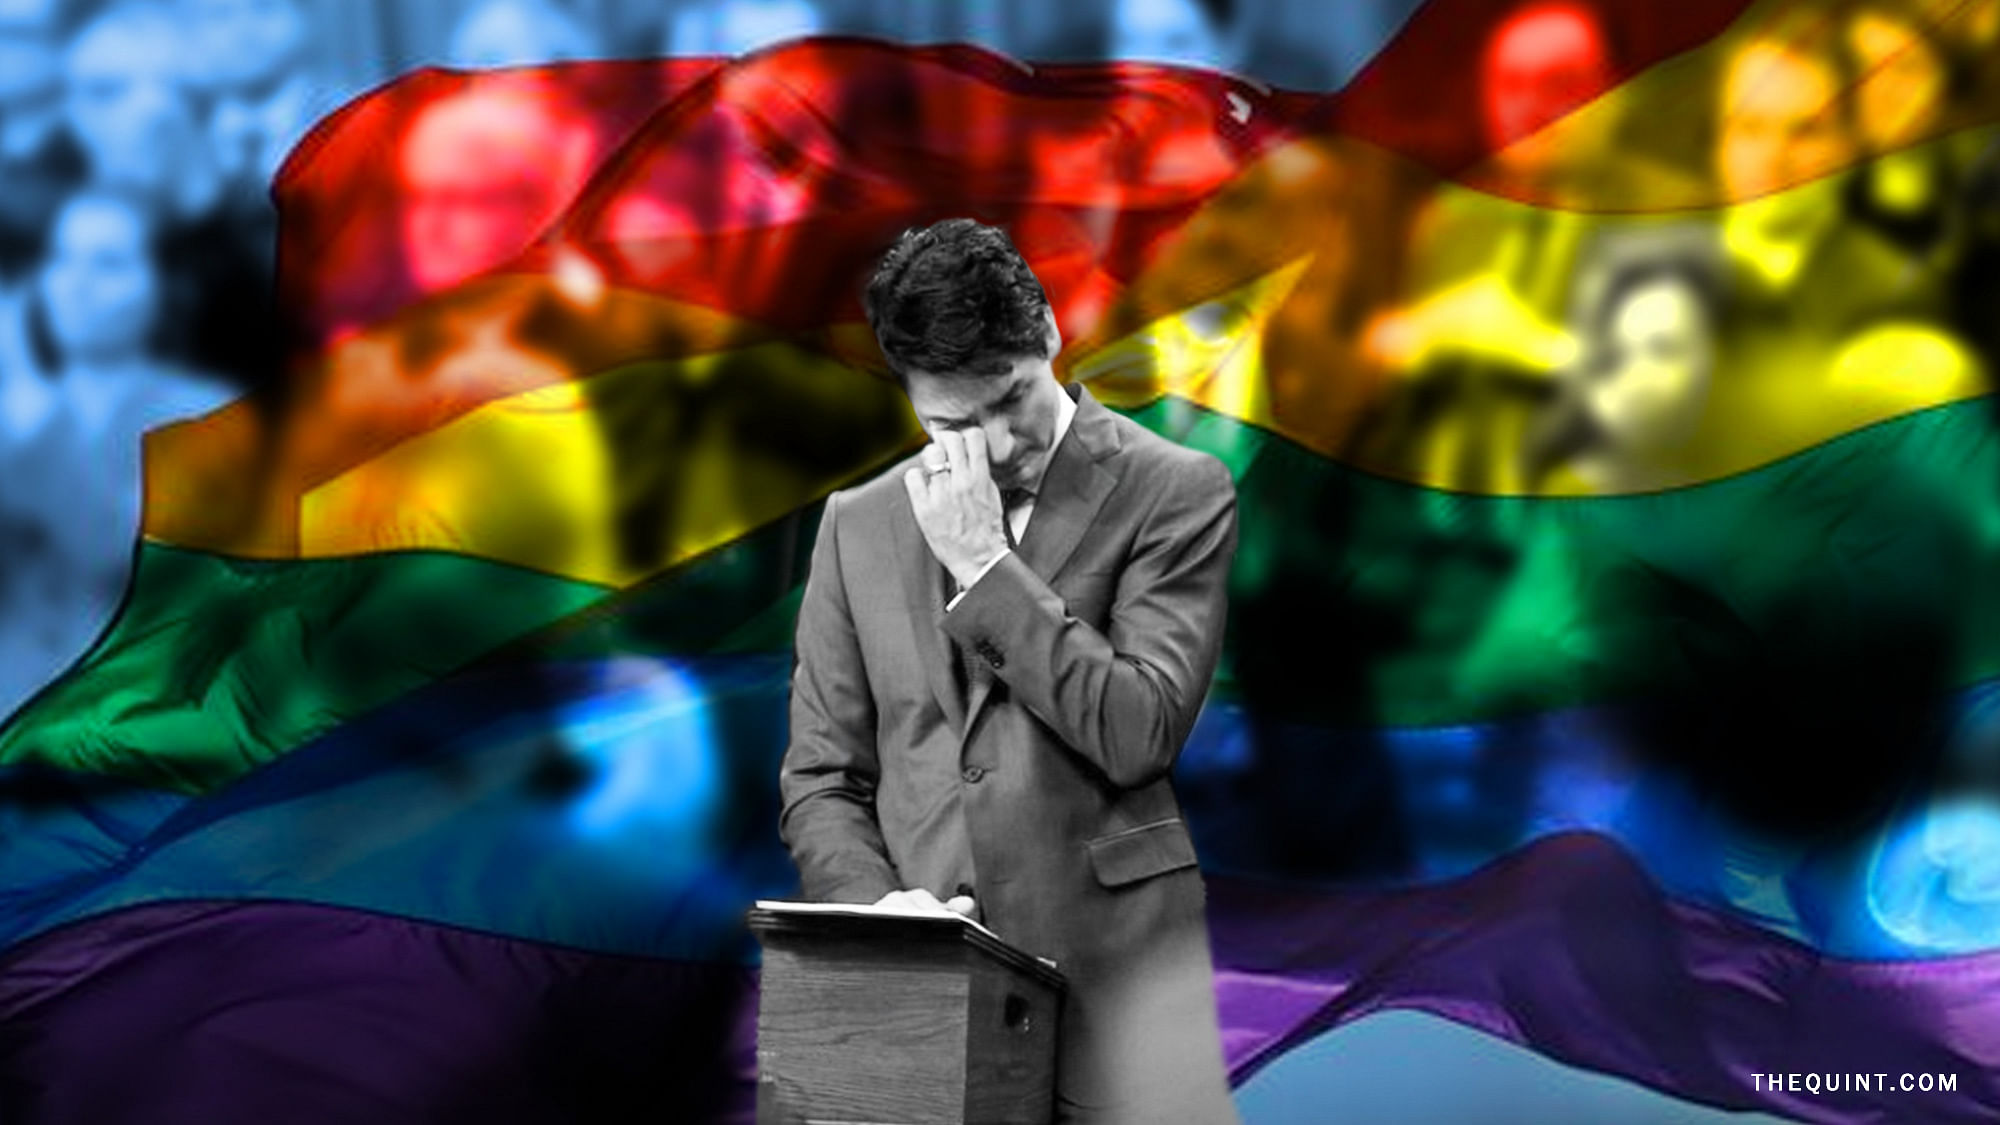 A teary-eyed Canadian Prime Minister at his country’s House of Commons, yesterday, apologised for the ‘purge’ of LGBTQ citizens.